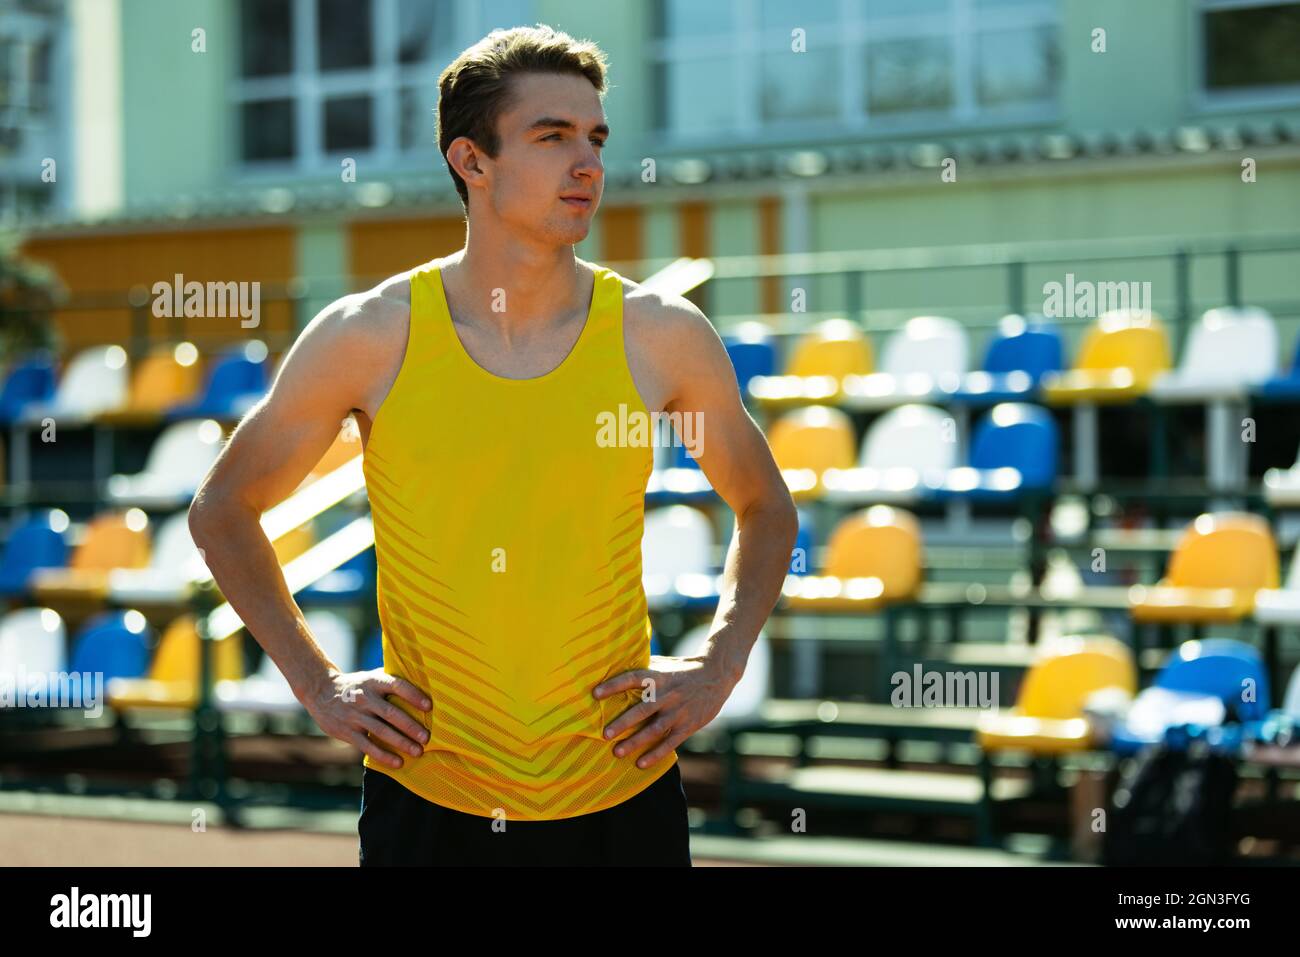 Close-up young Caucasian man, male athlete, runner at public stadium, sport court or running track outdoors. Summer sport games. Stock Photo